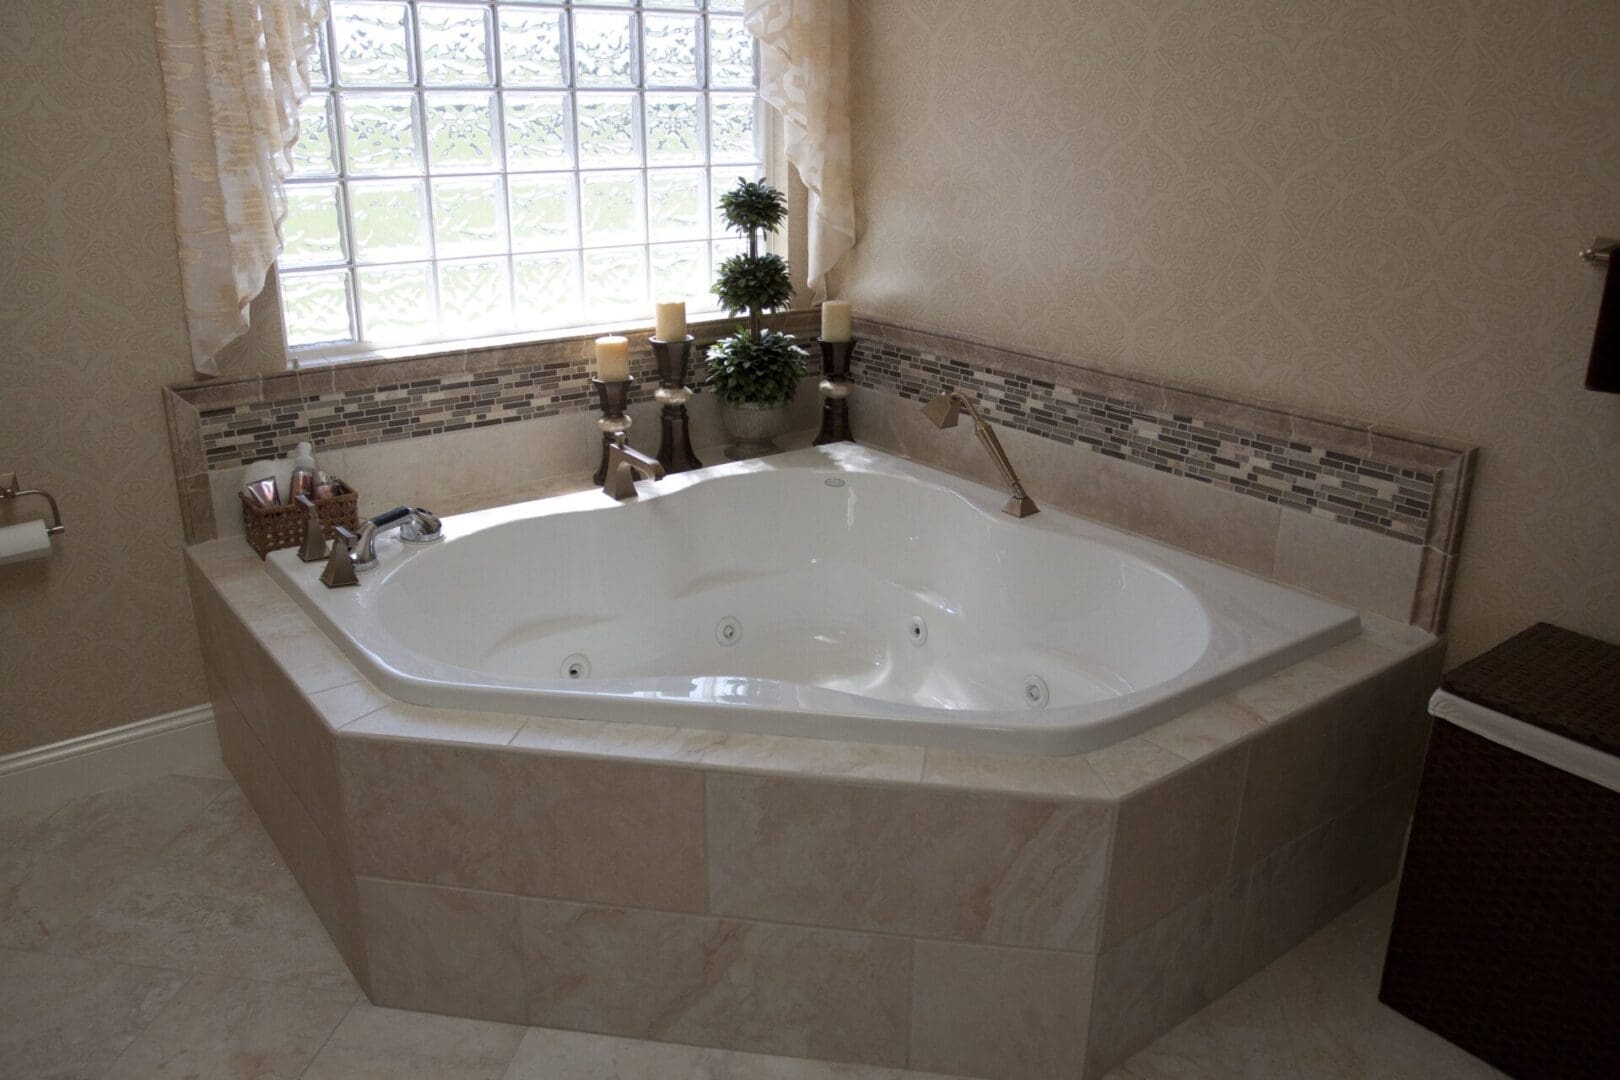 A large white tub sitting in the middle of a bathroom.